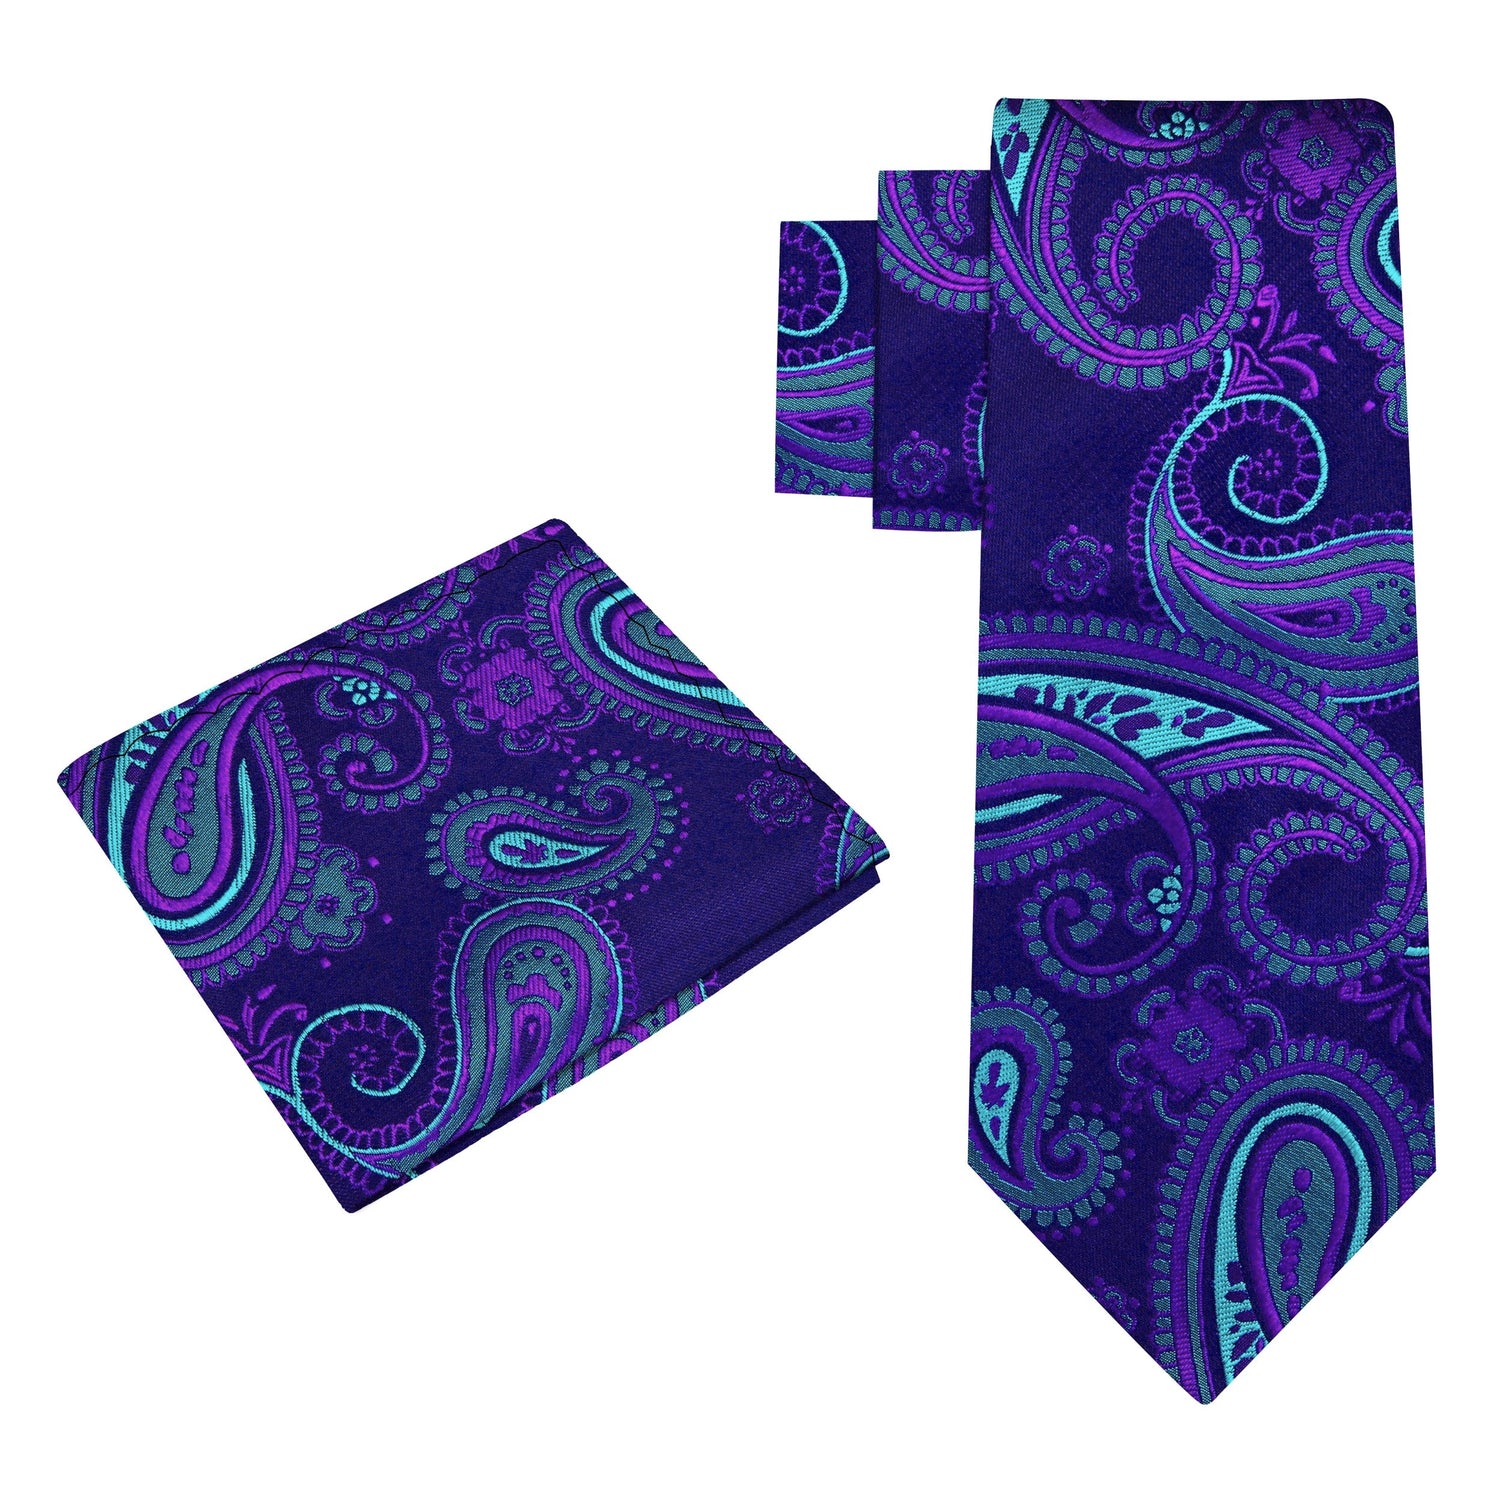 Alt View: A Purple, Teal Paisley Pattern Silk Necktie, With Matching Pocket Square